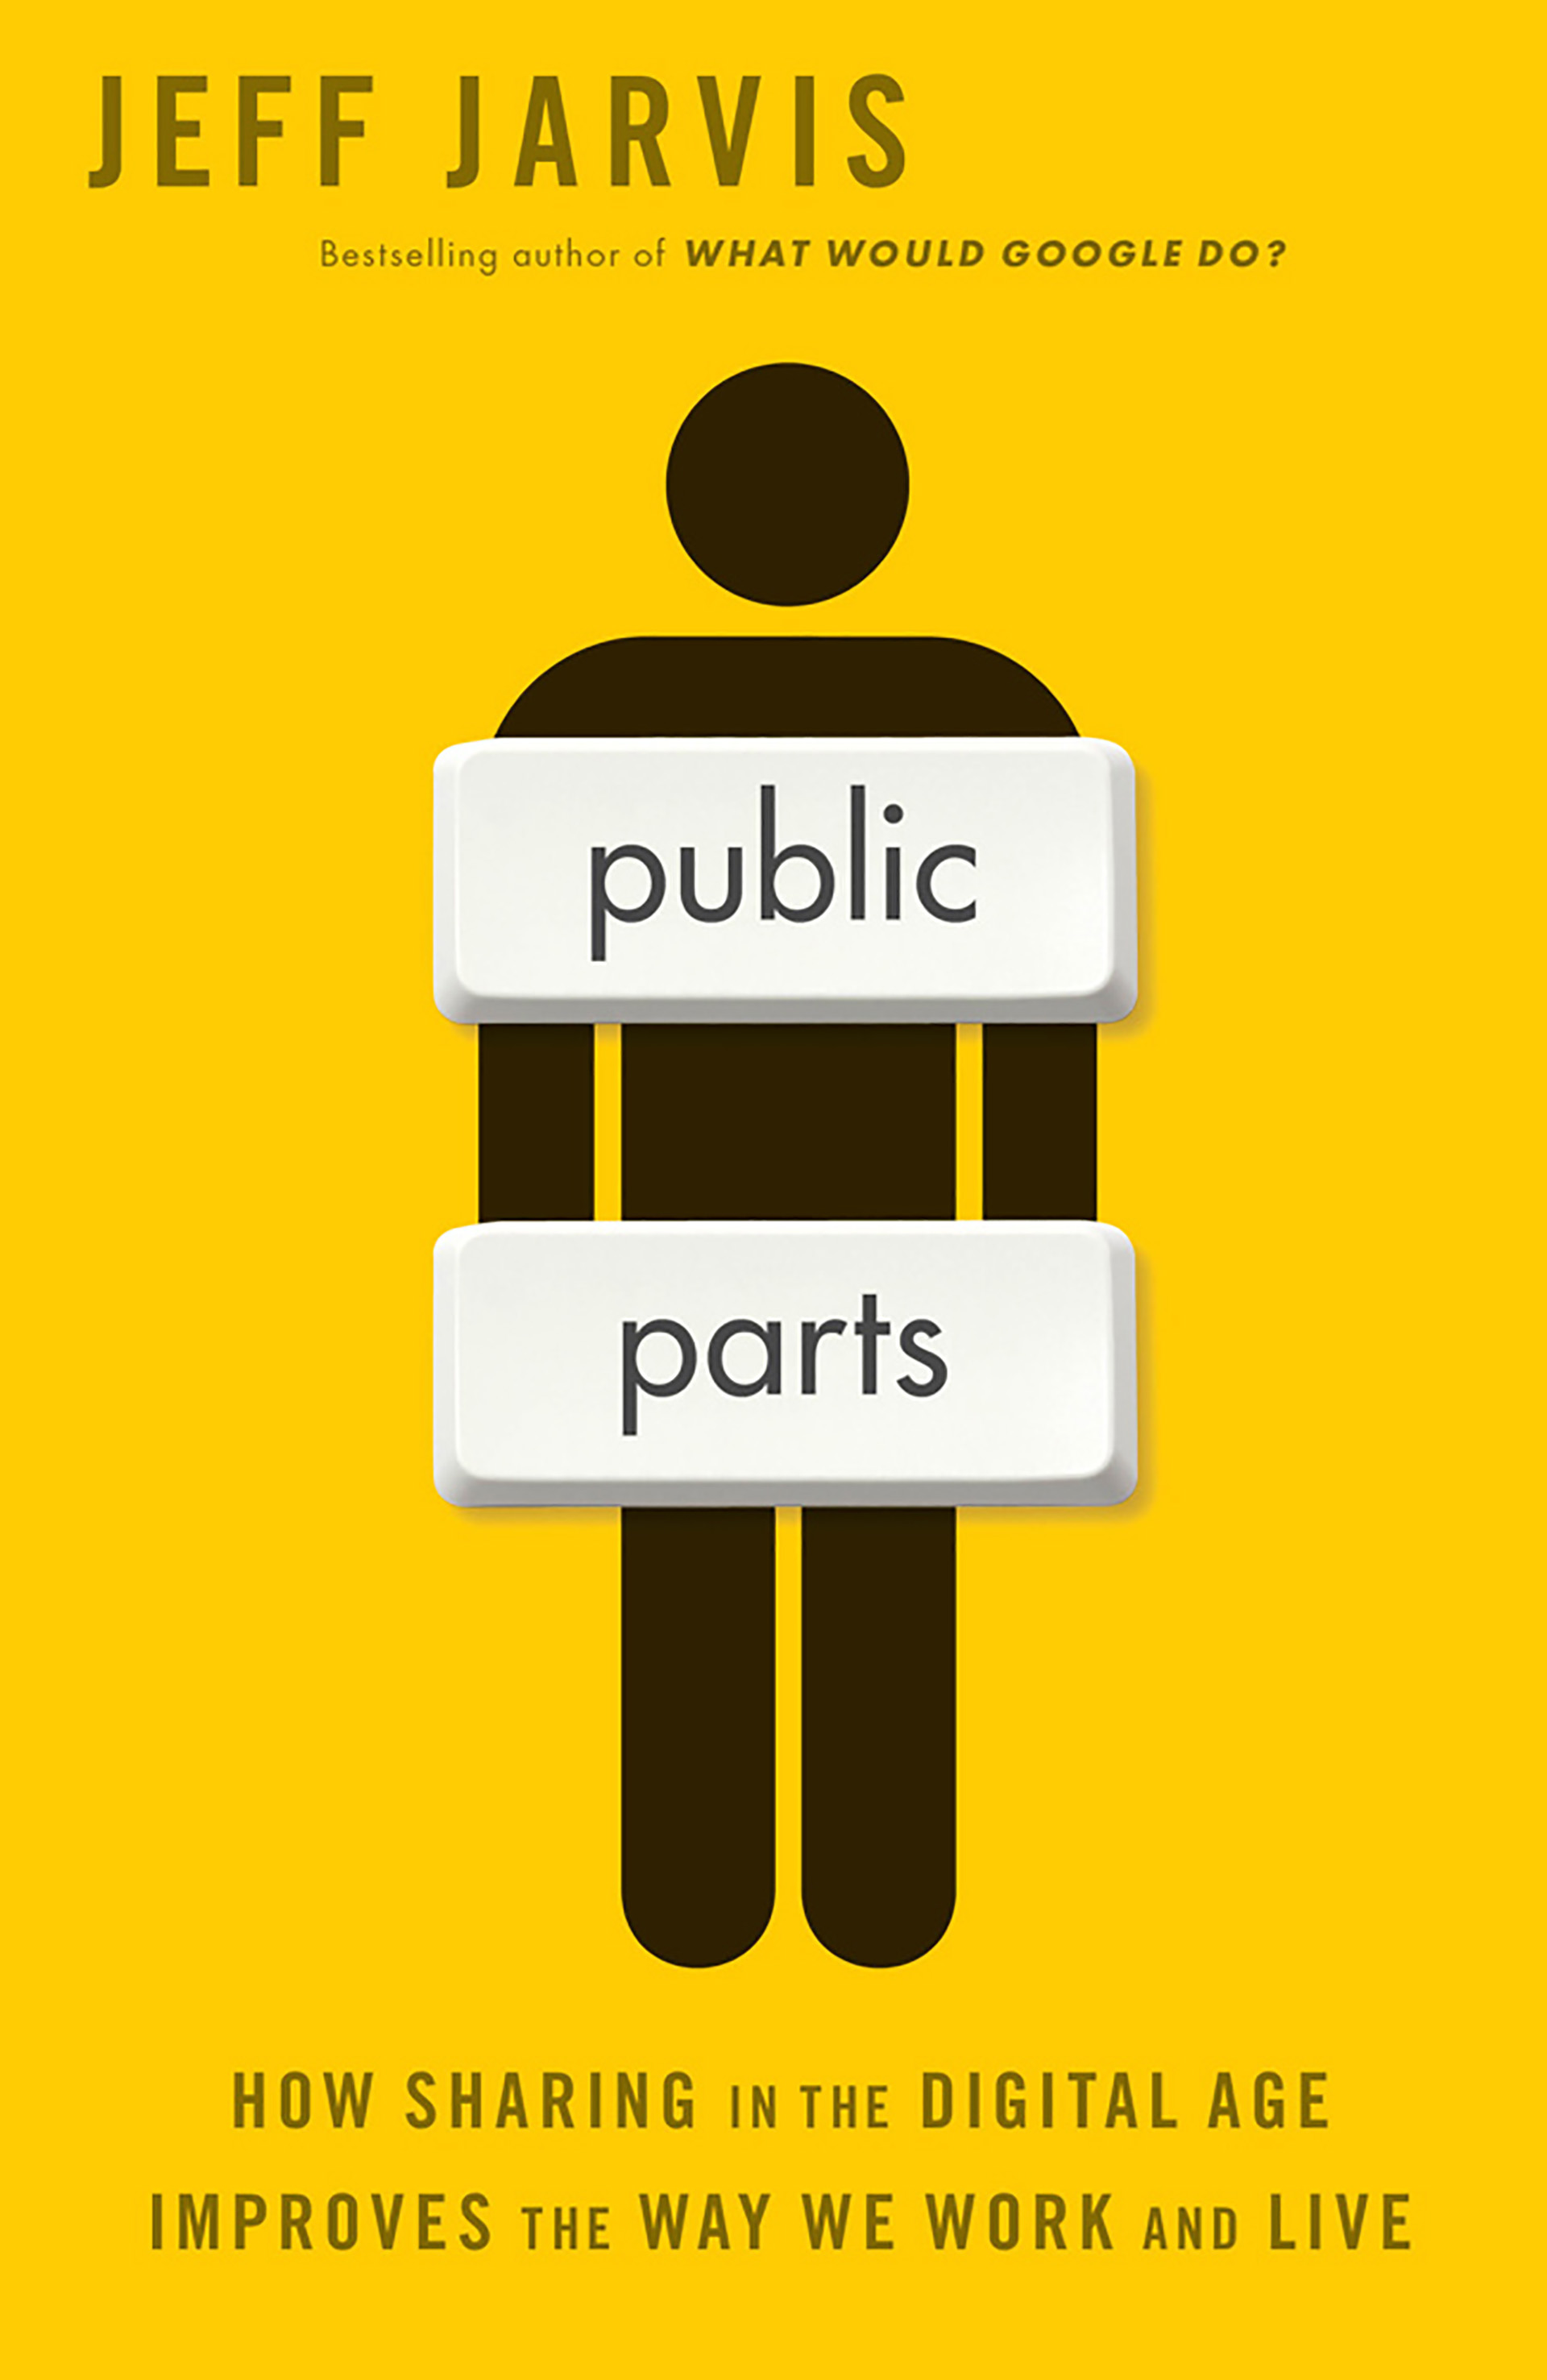 cover of Jeff Jarvis' book "Public Parts"